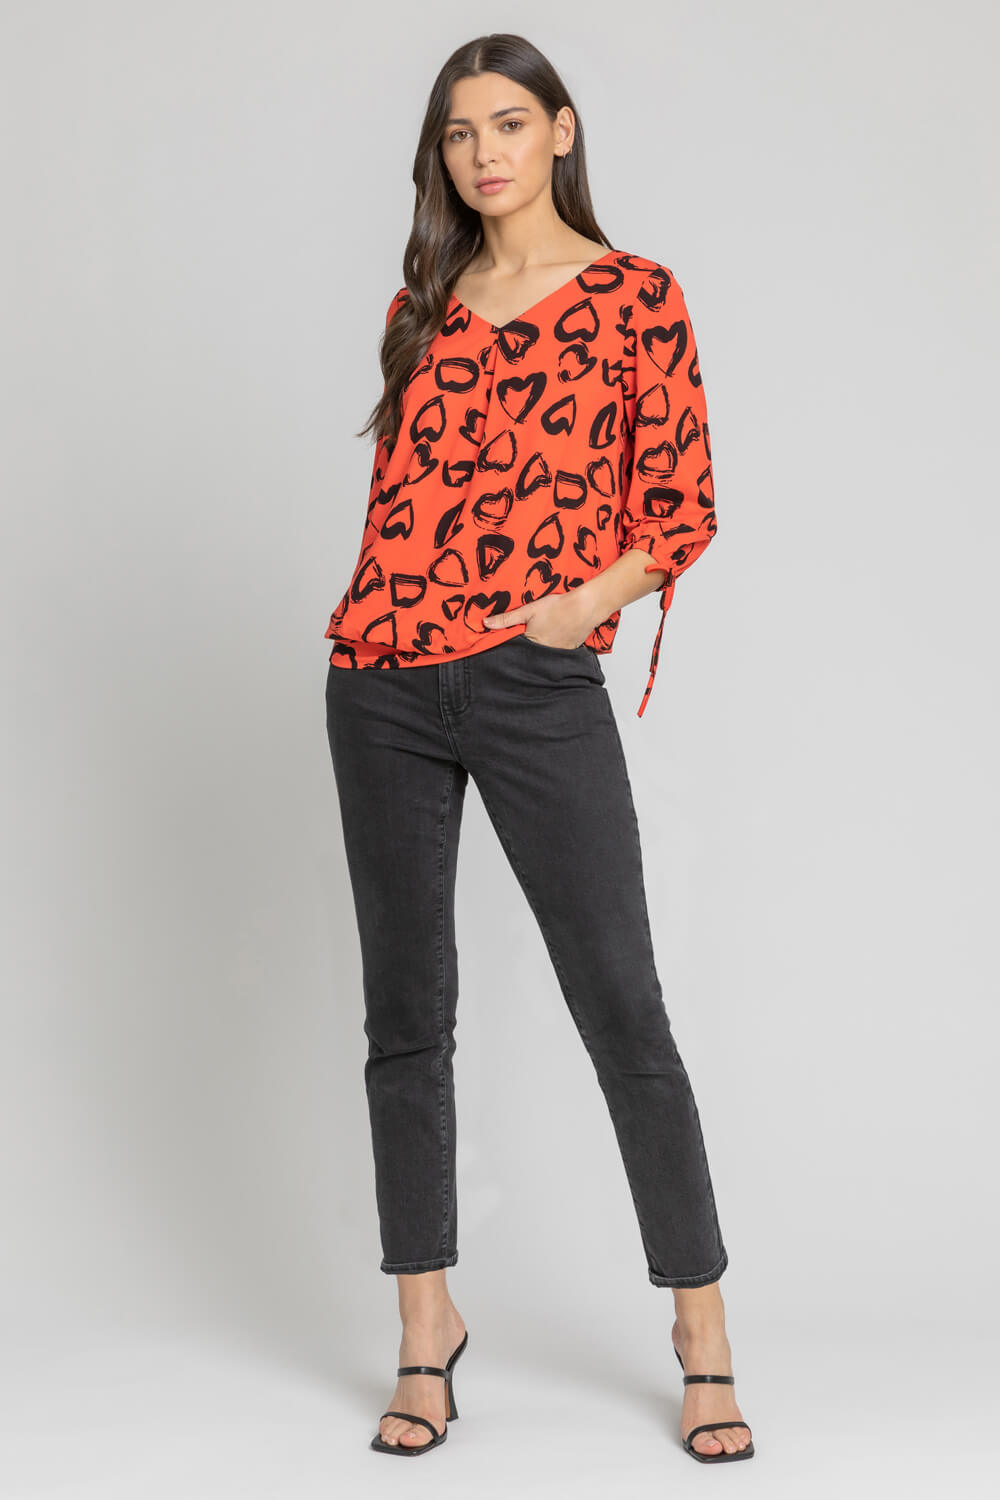 Red Heart Print Blouson Top, Image 3 of 4